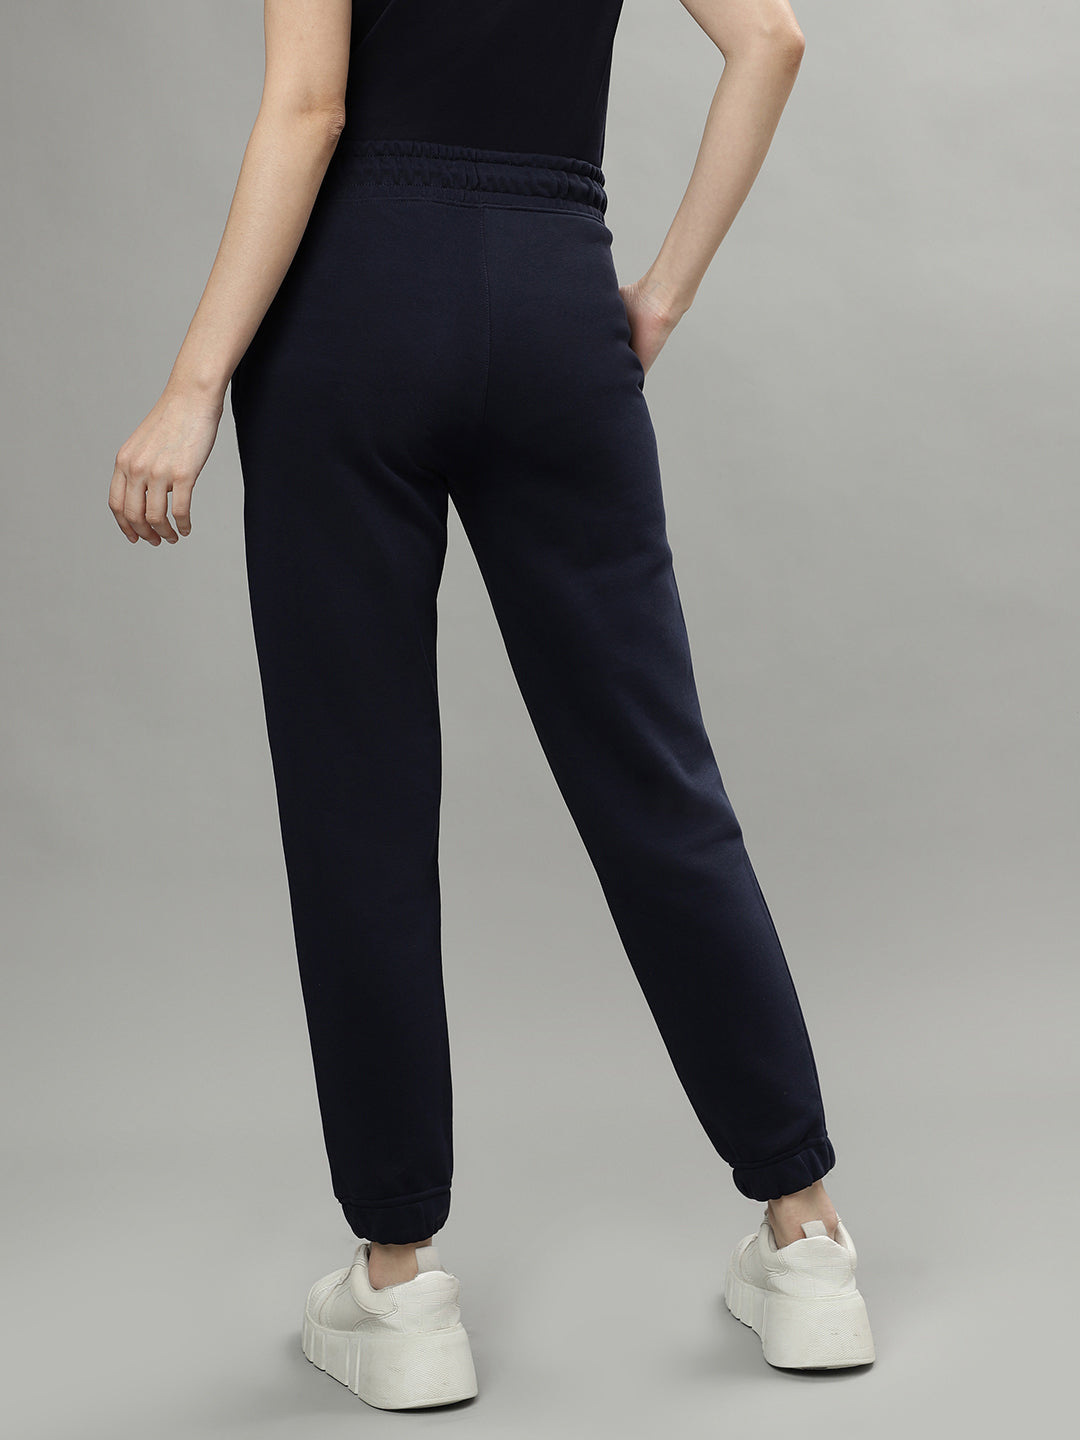 Best Track Pants For Women In India - The Economic Times